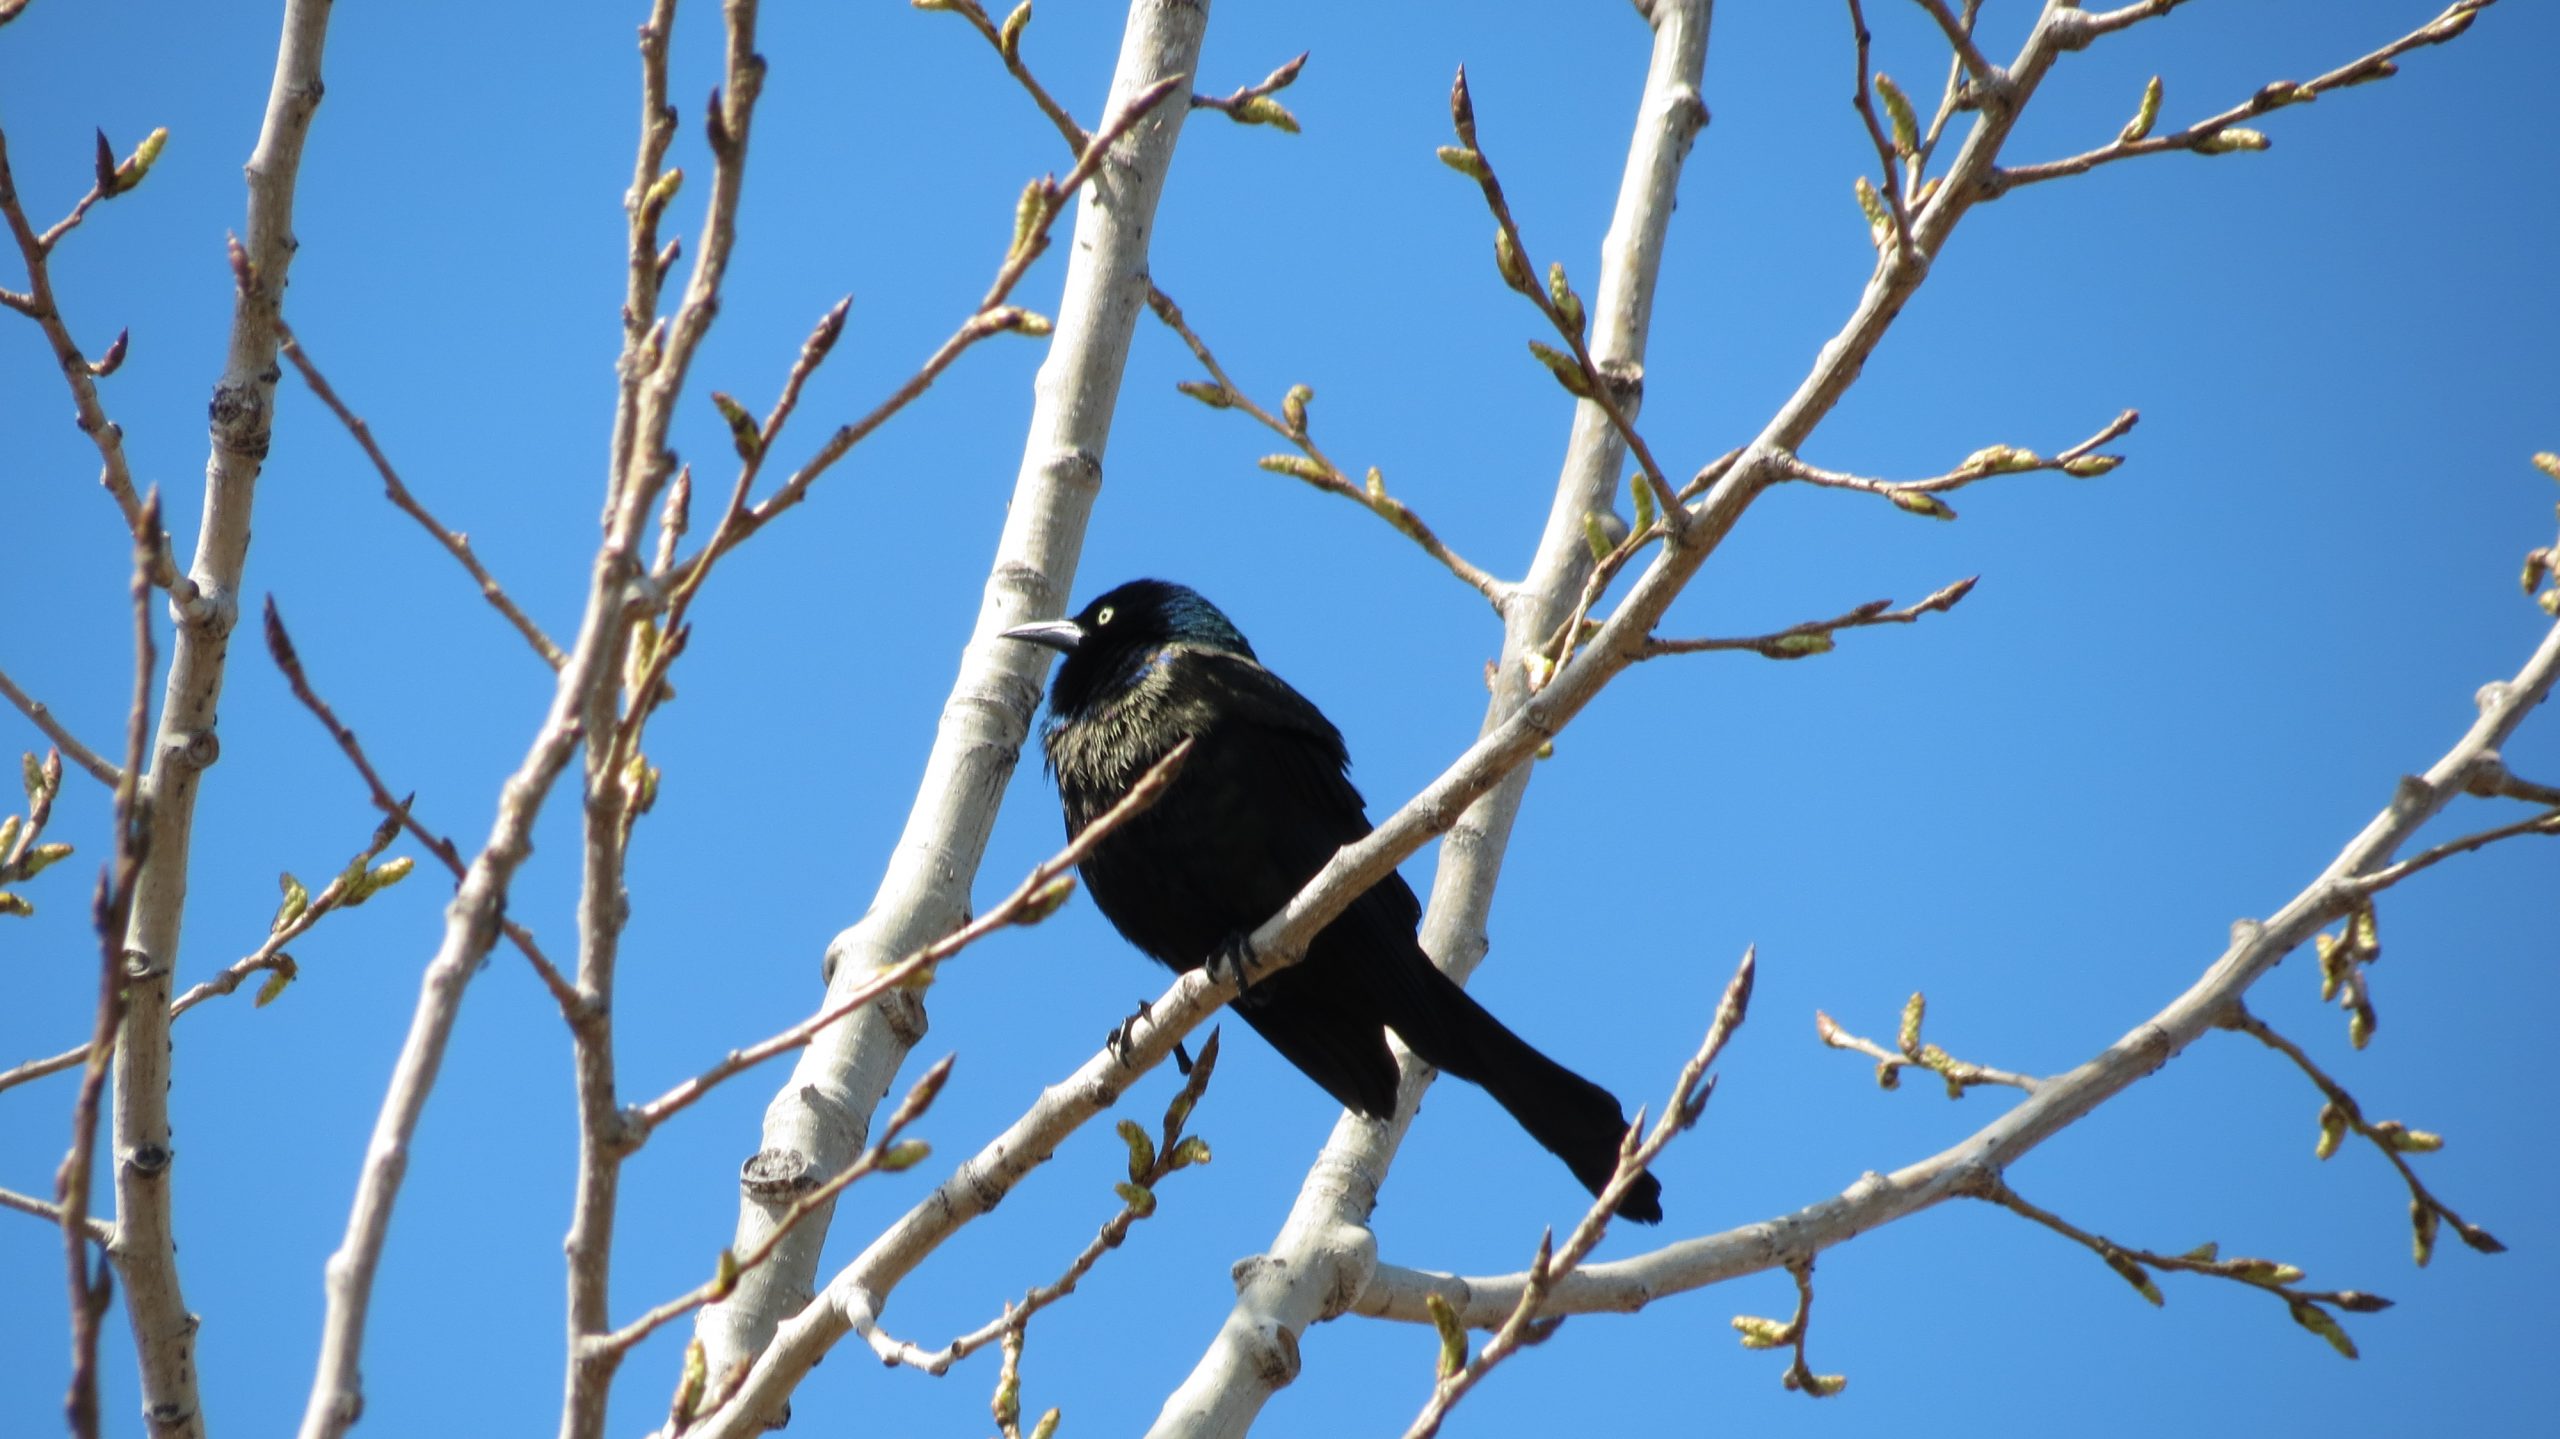 A common grackle with glossy black-iridescent plumage and bright yellow eye in Colonel Sam Smith Park.